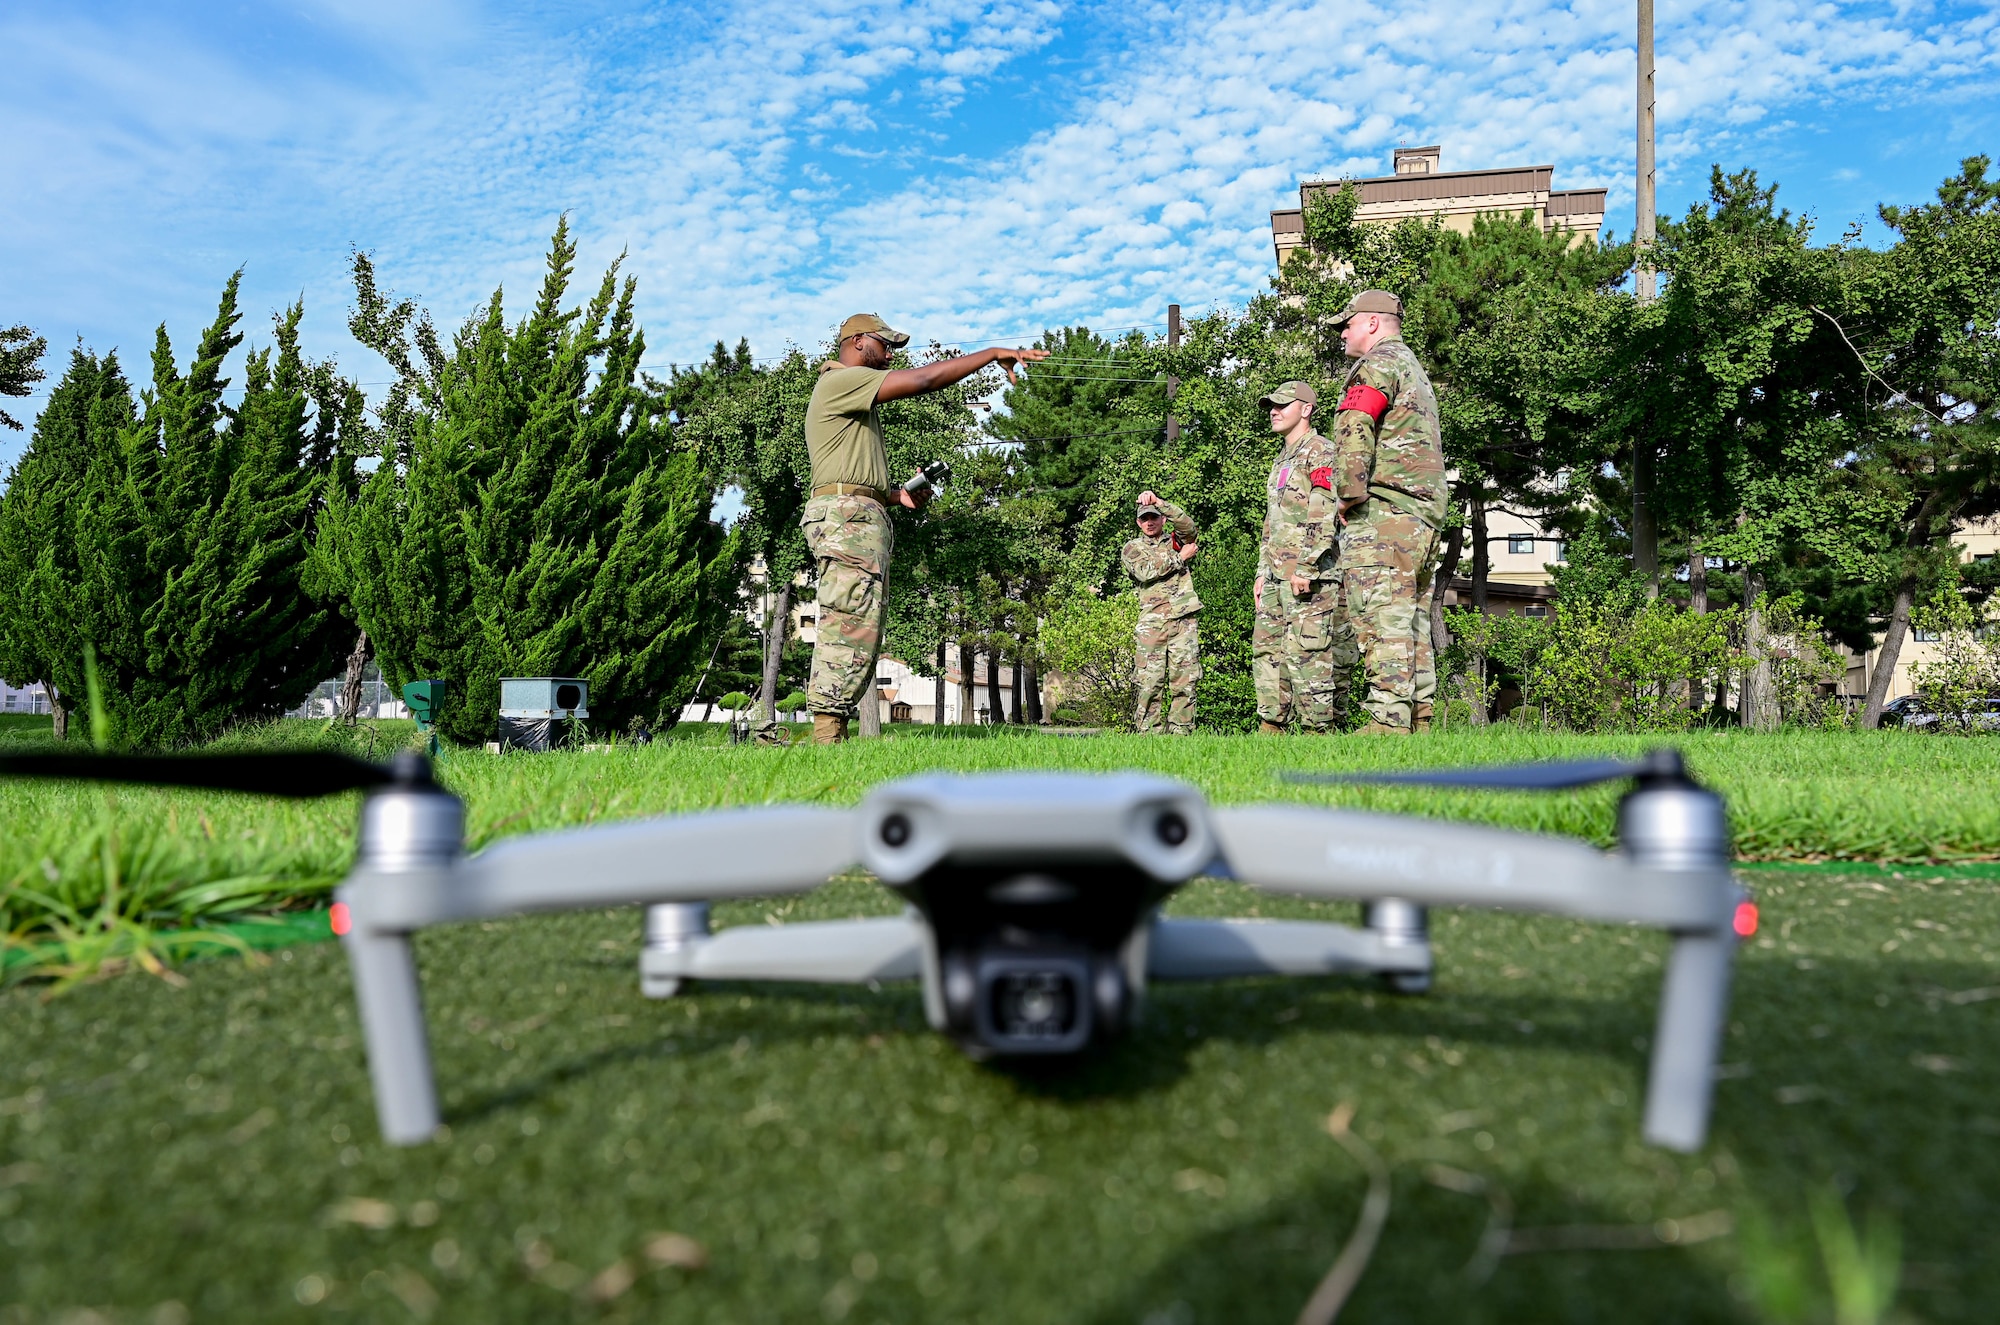 Drone rests on ground with military members standing behind it.